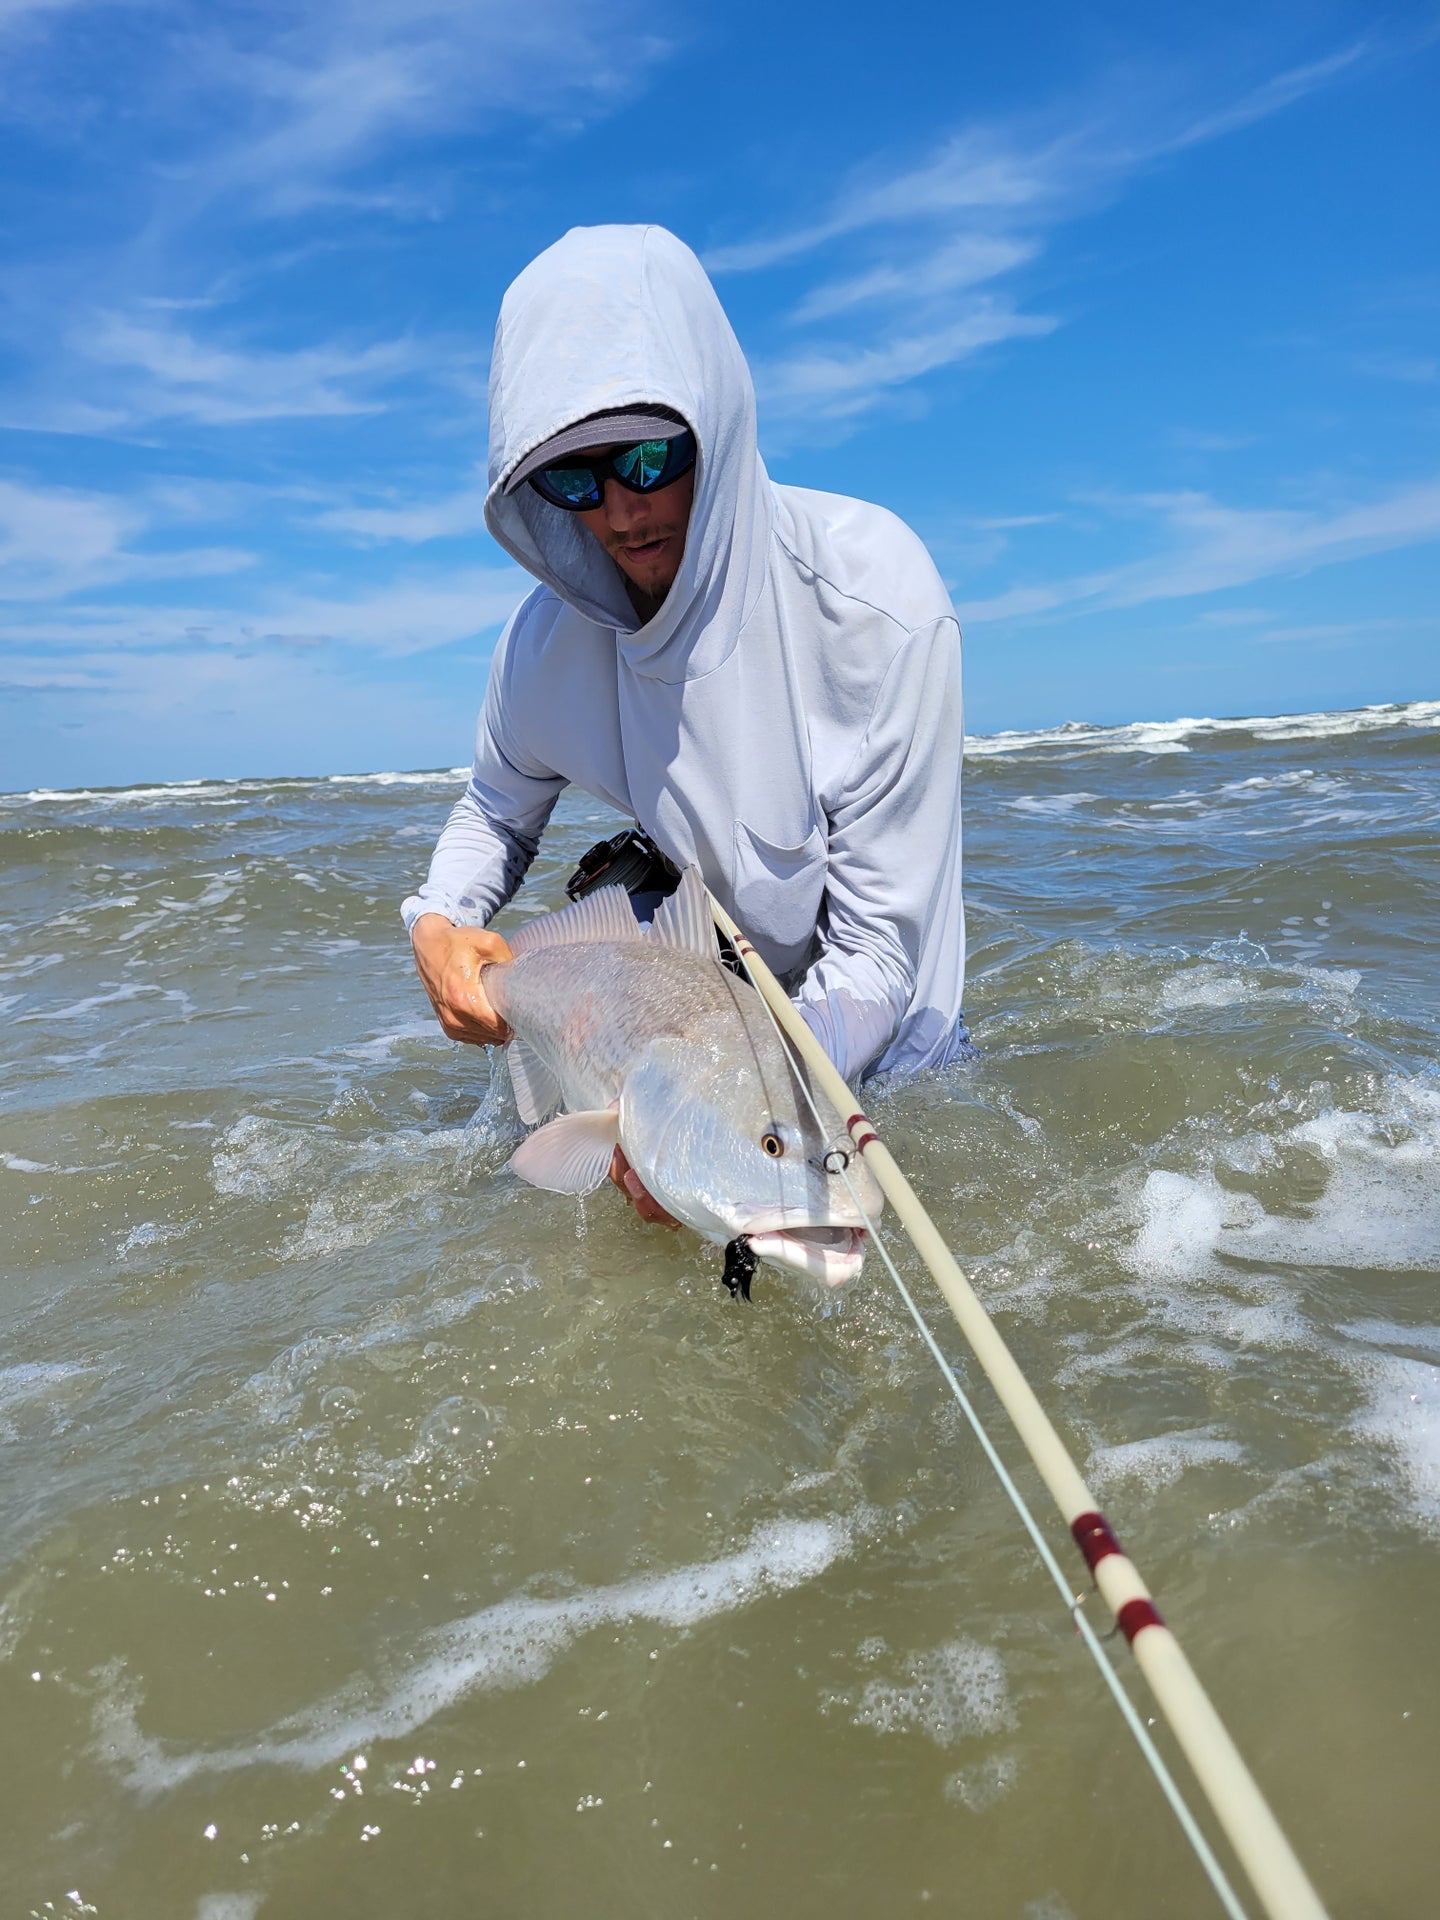 Fly fishing for redfish in the surf | Dedicated To The Smallest Of Skiffs